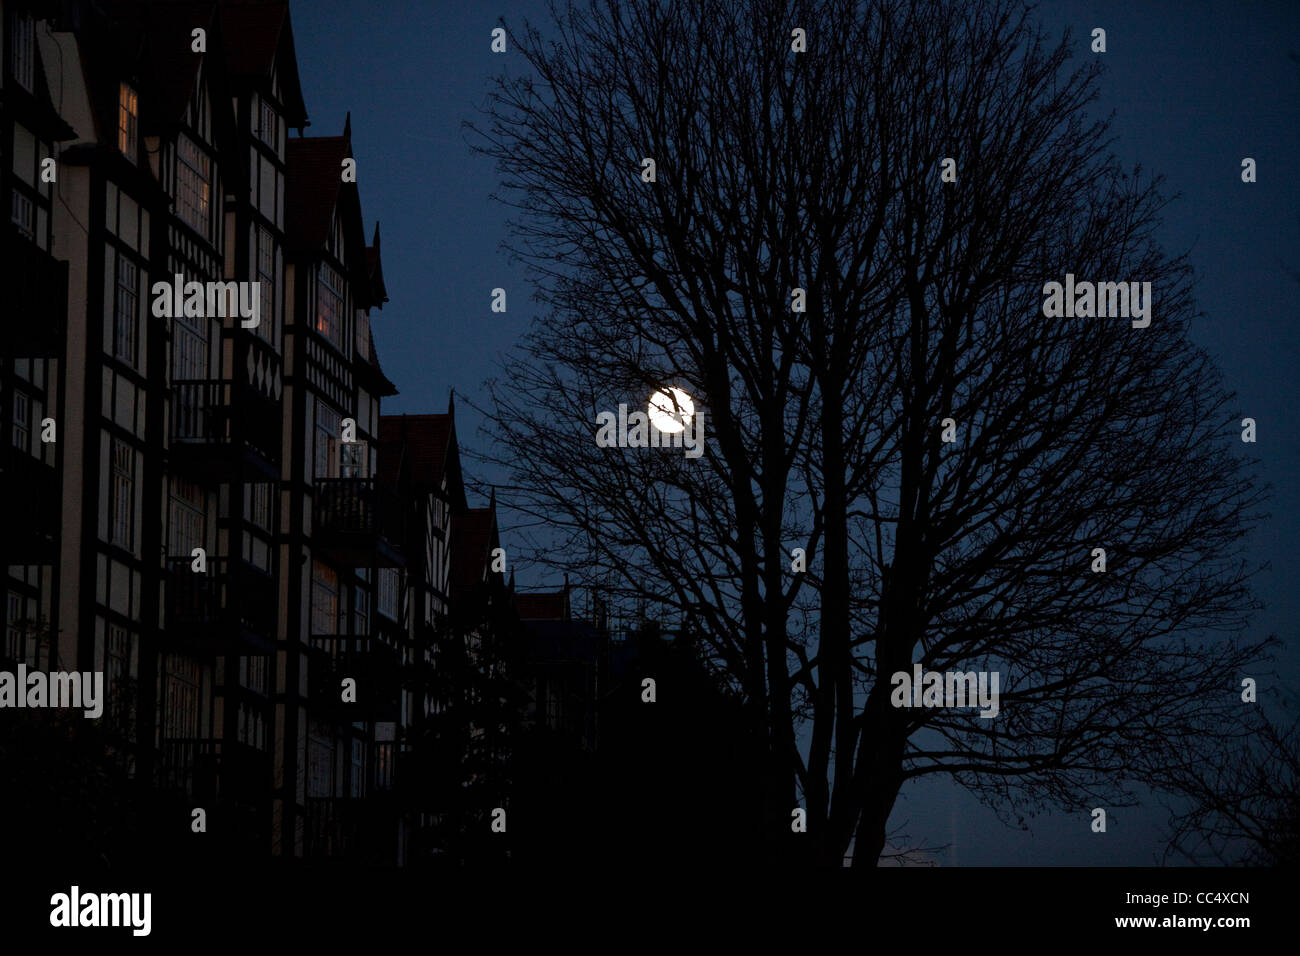 Full moon seen through the silhouette of a  bear tree, Holly Lodge Housing Estate, Makepeace Avenue, Highgate, London, N6, England, UK. Stock Photo